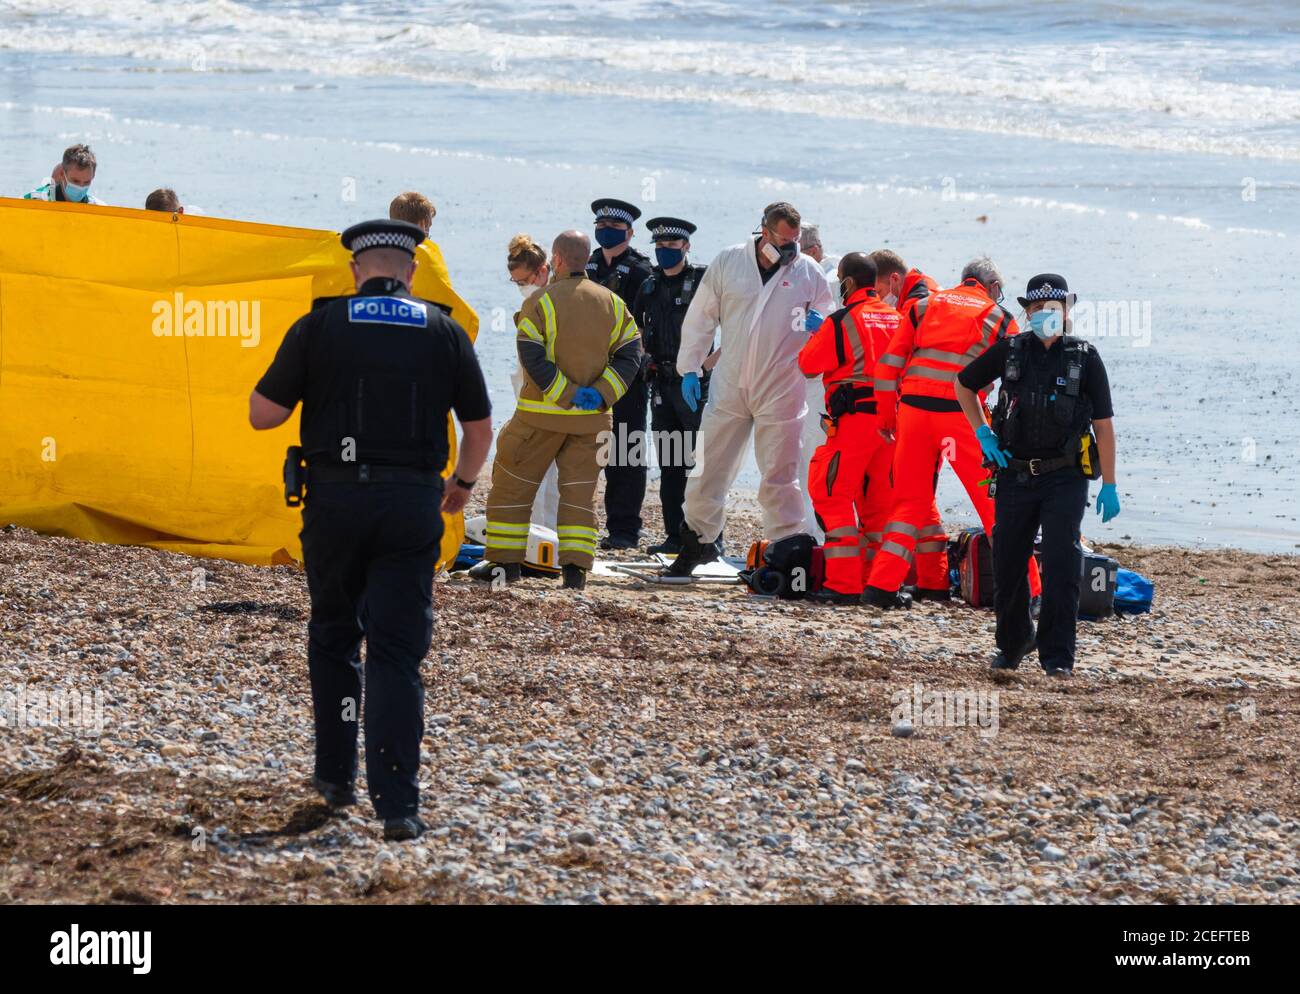 Emergency Services (police, fire, air ambulance, paramedics) at an incident on a beach in the UK. All wearing face masks due to COVID19 Coronavirus. Stock Photo